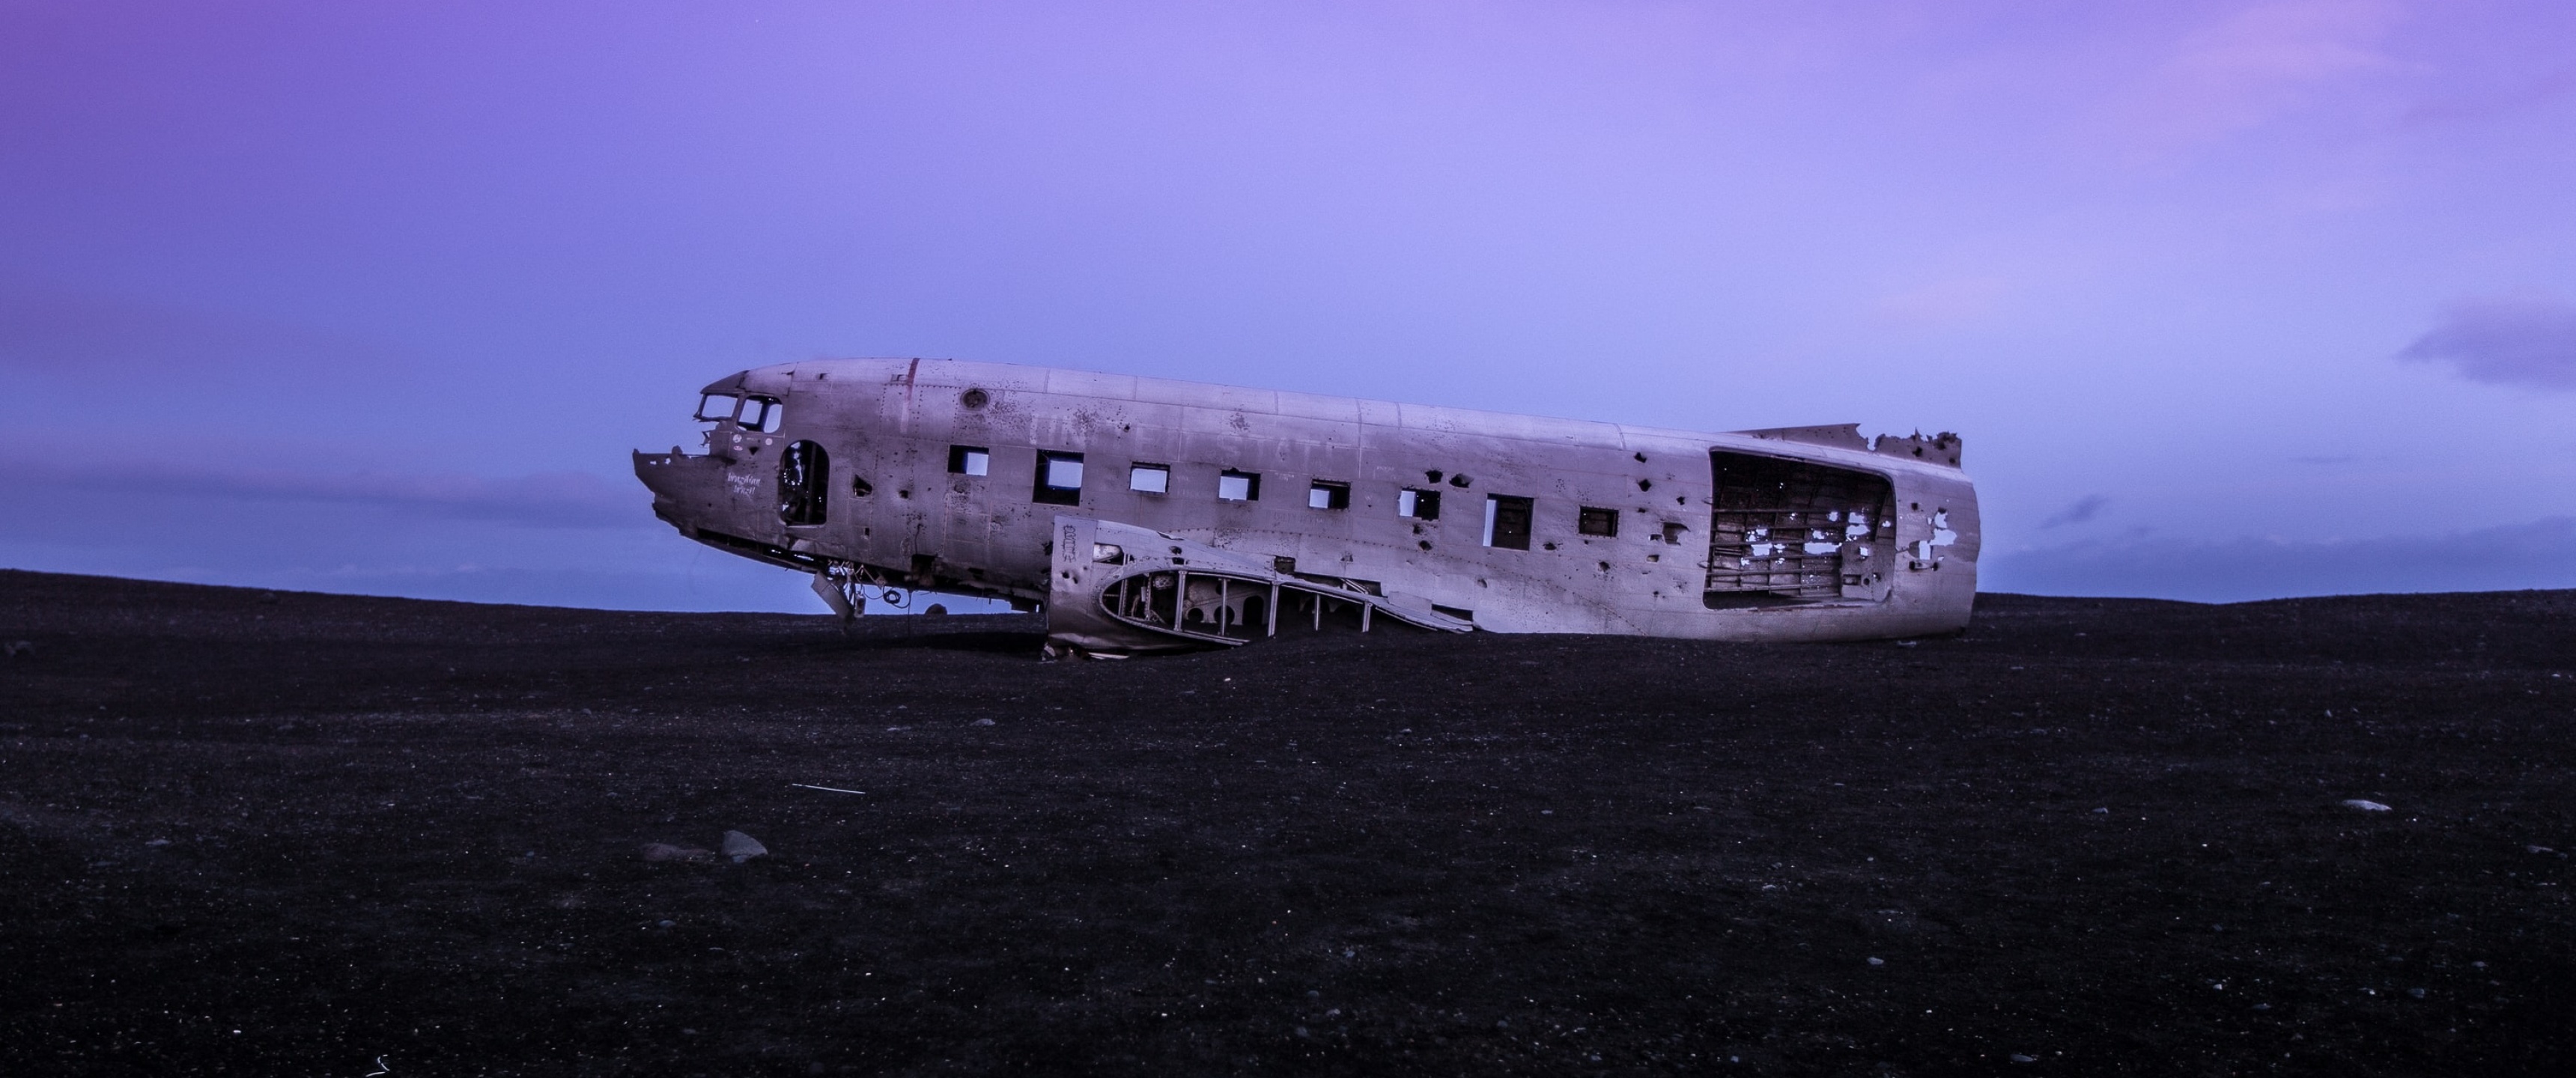 Crashed Airplane Wallpaper 4K, Douglas DC- Wrecked, Photography